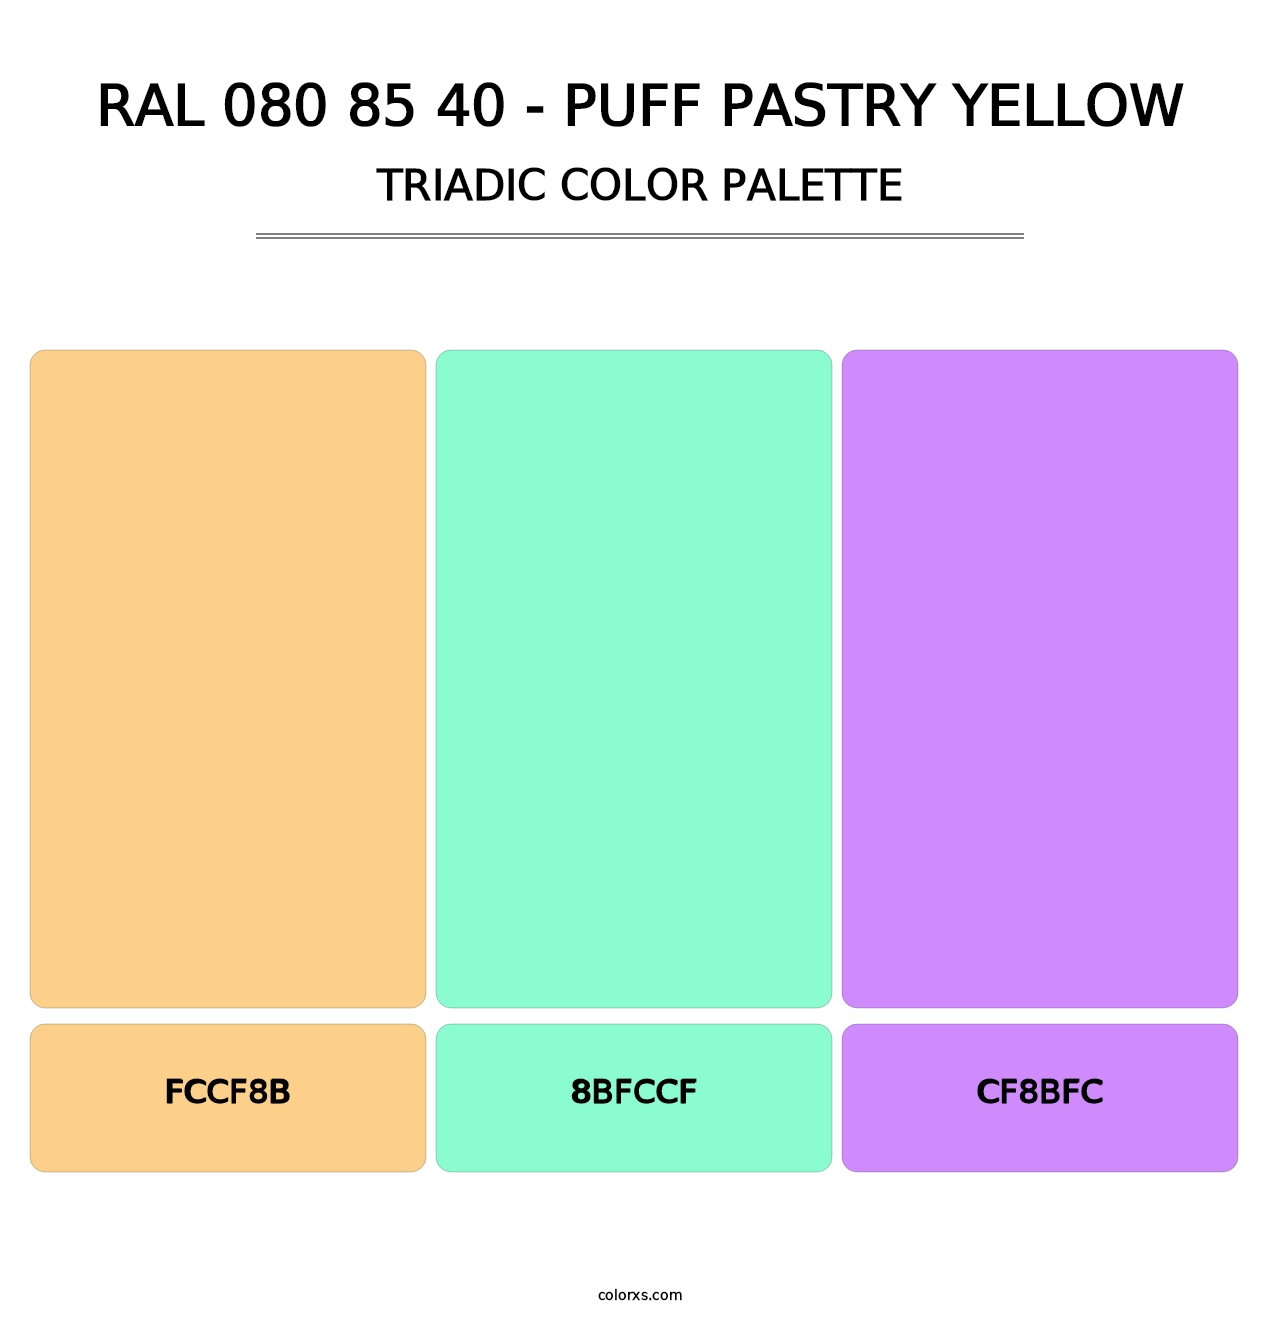 RAL 080 85 40 - Puff Pastry Yellow - Triadic Color Palette